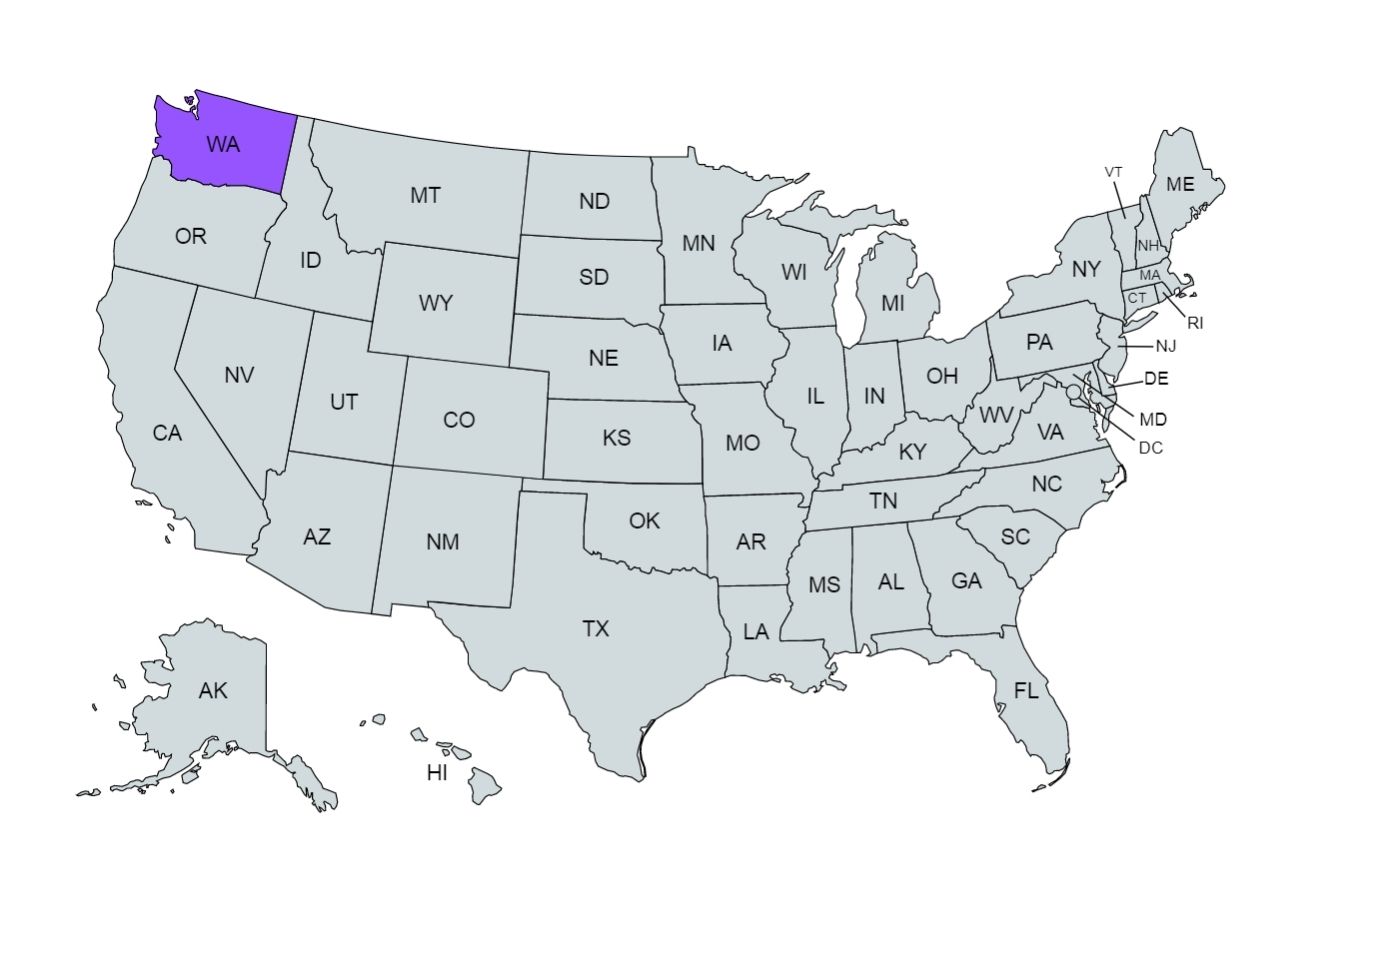 The US map with the Washington district marked in purple